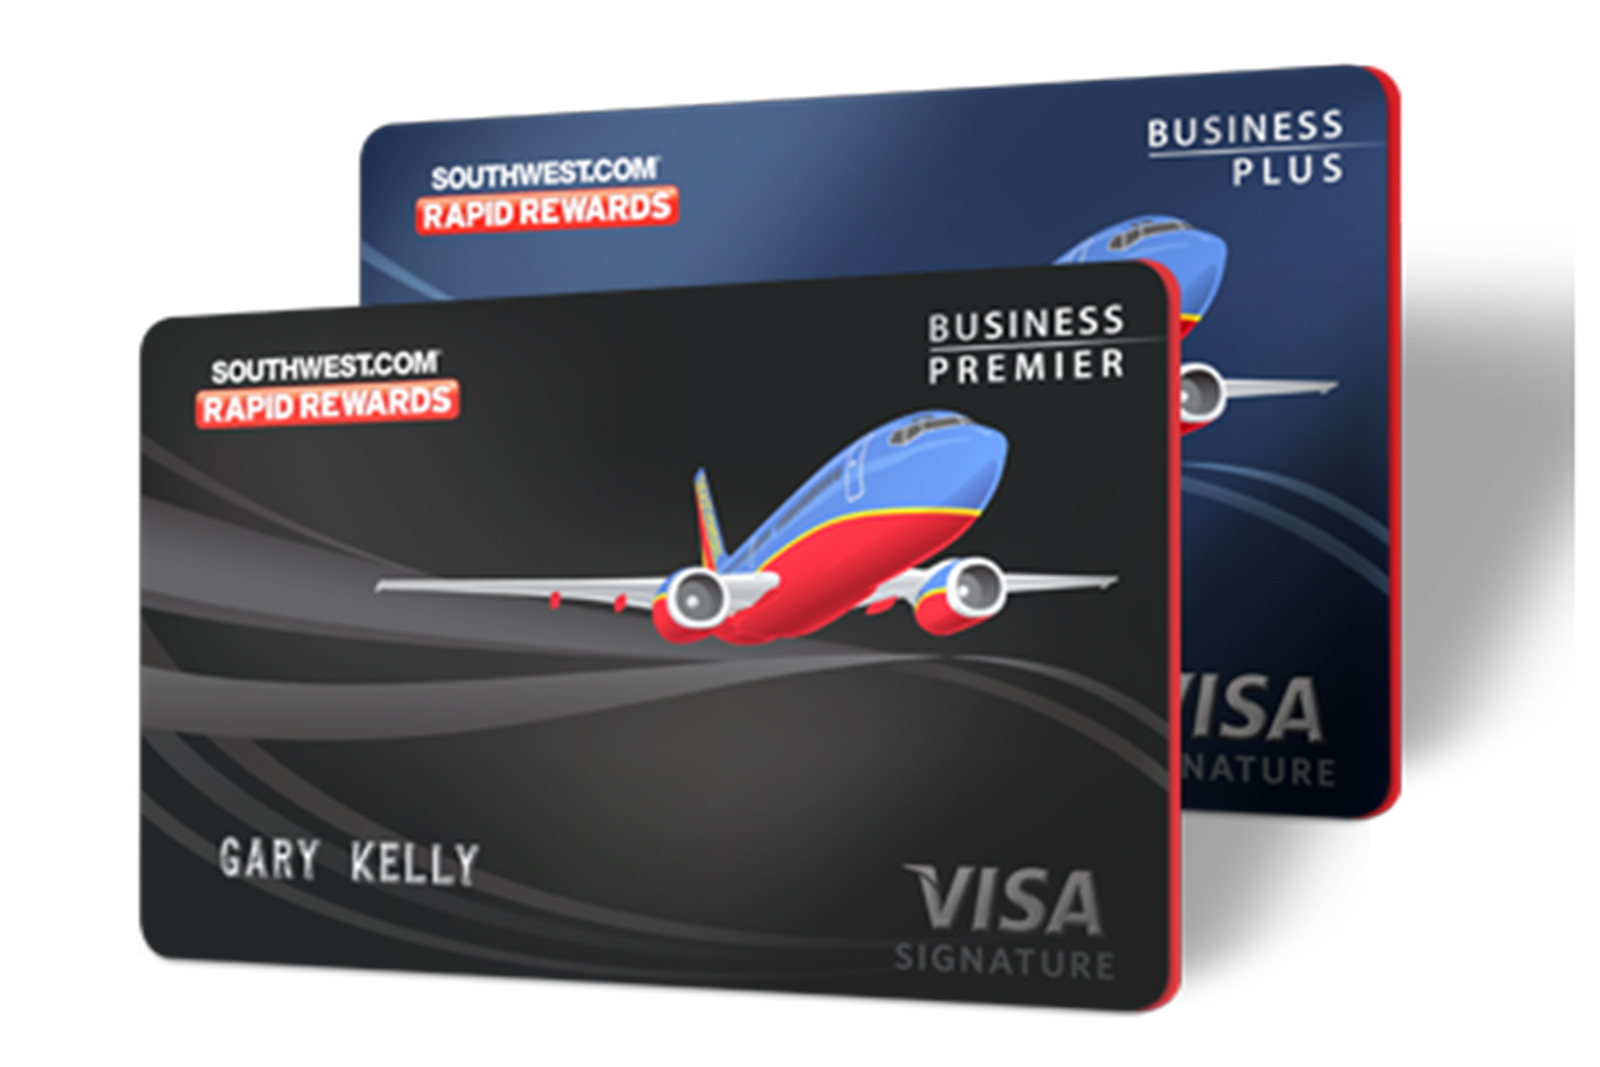 Southwest (LUV) Airlines May Replace Chase for Credit Cards Program